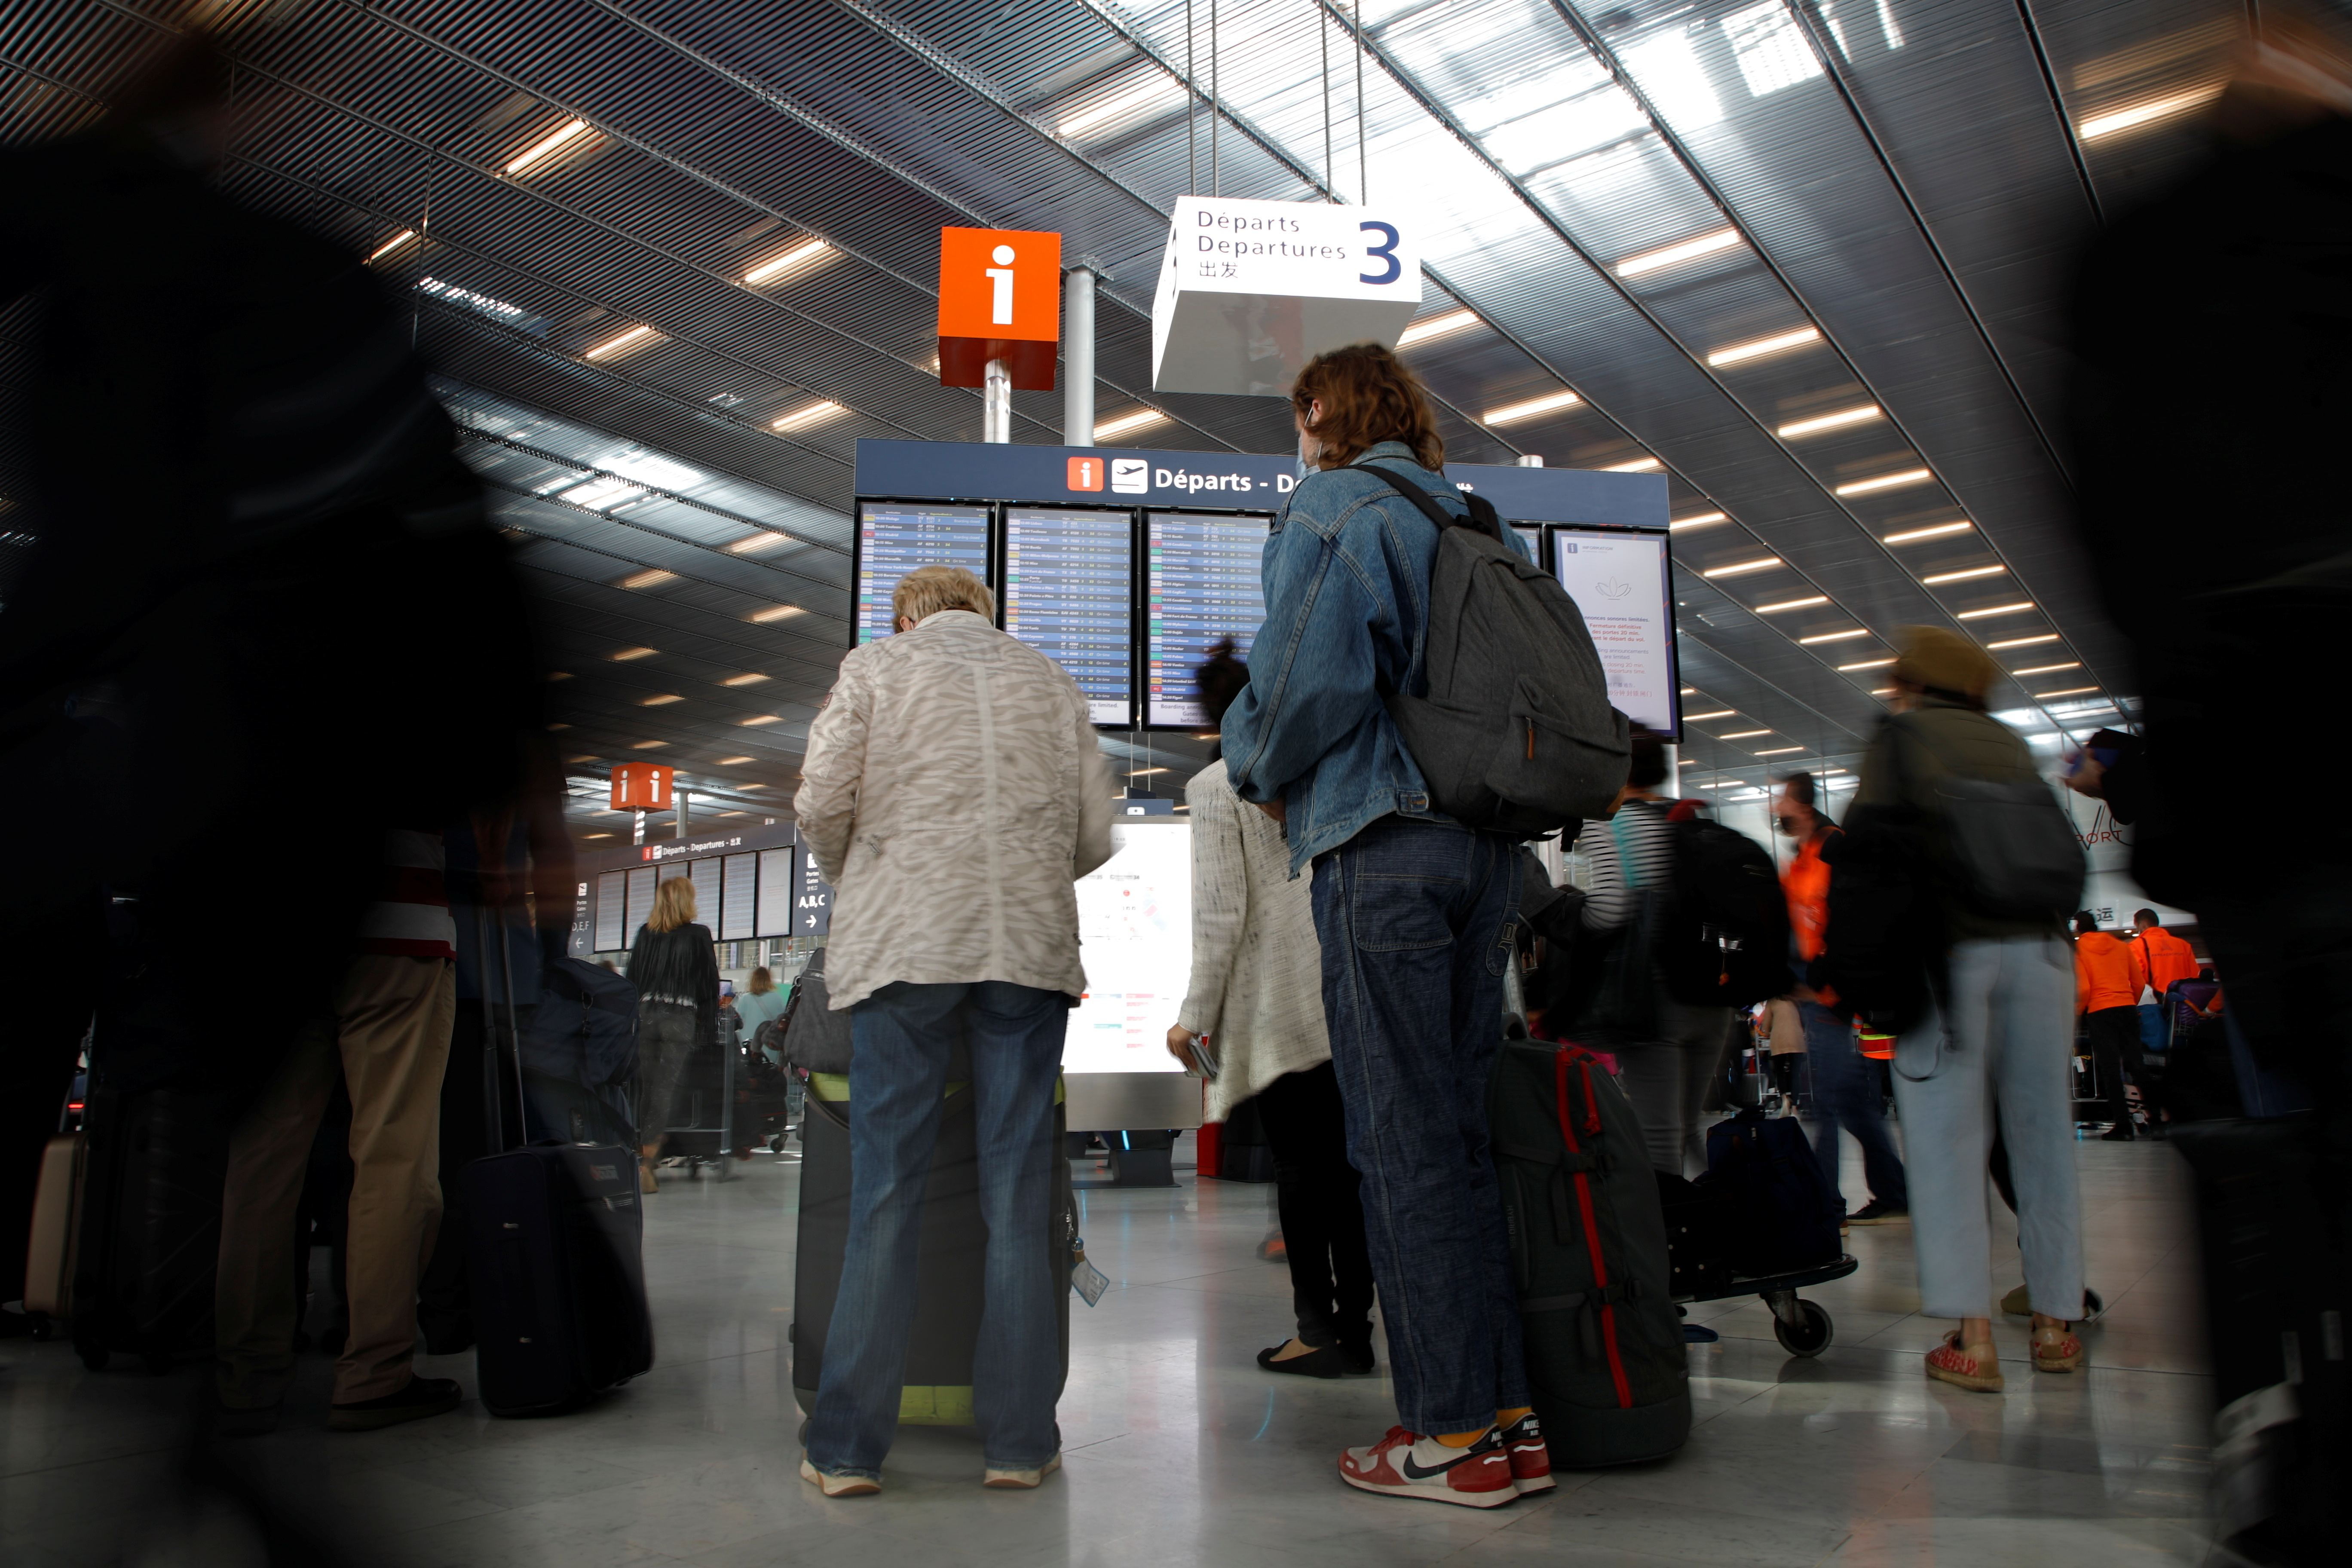 Passengers stand in front of a departures board at Orly Airport